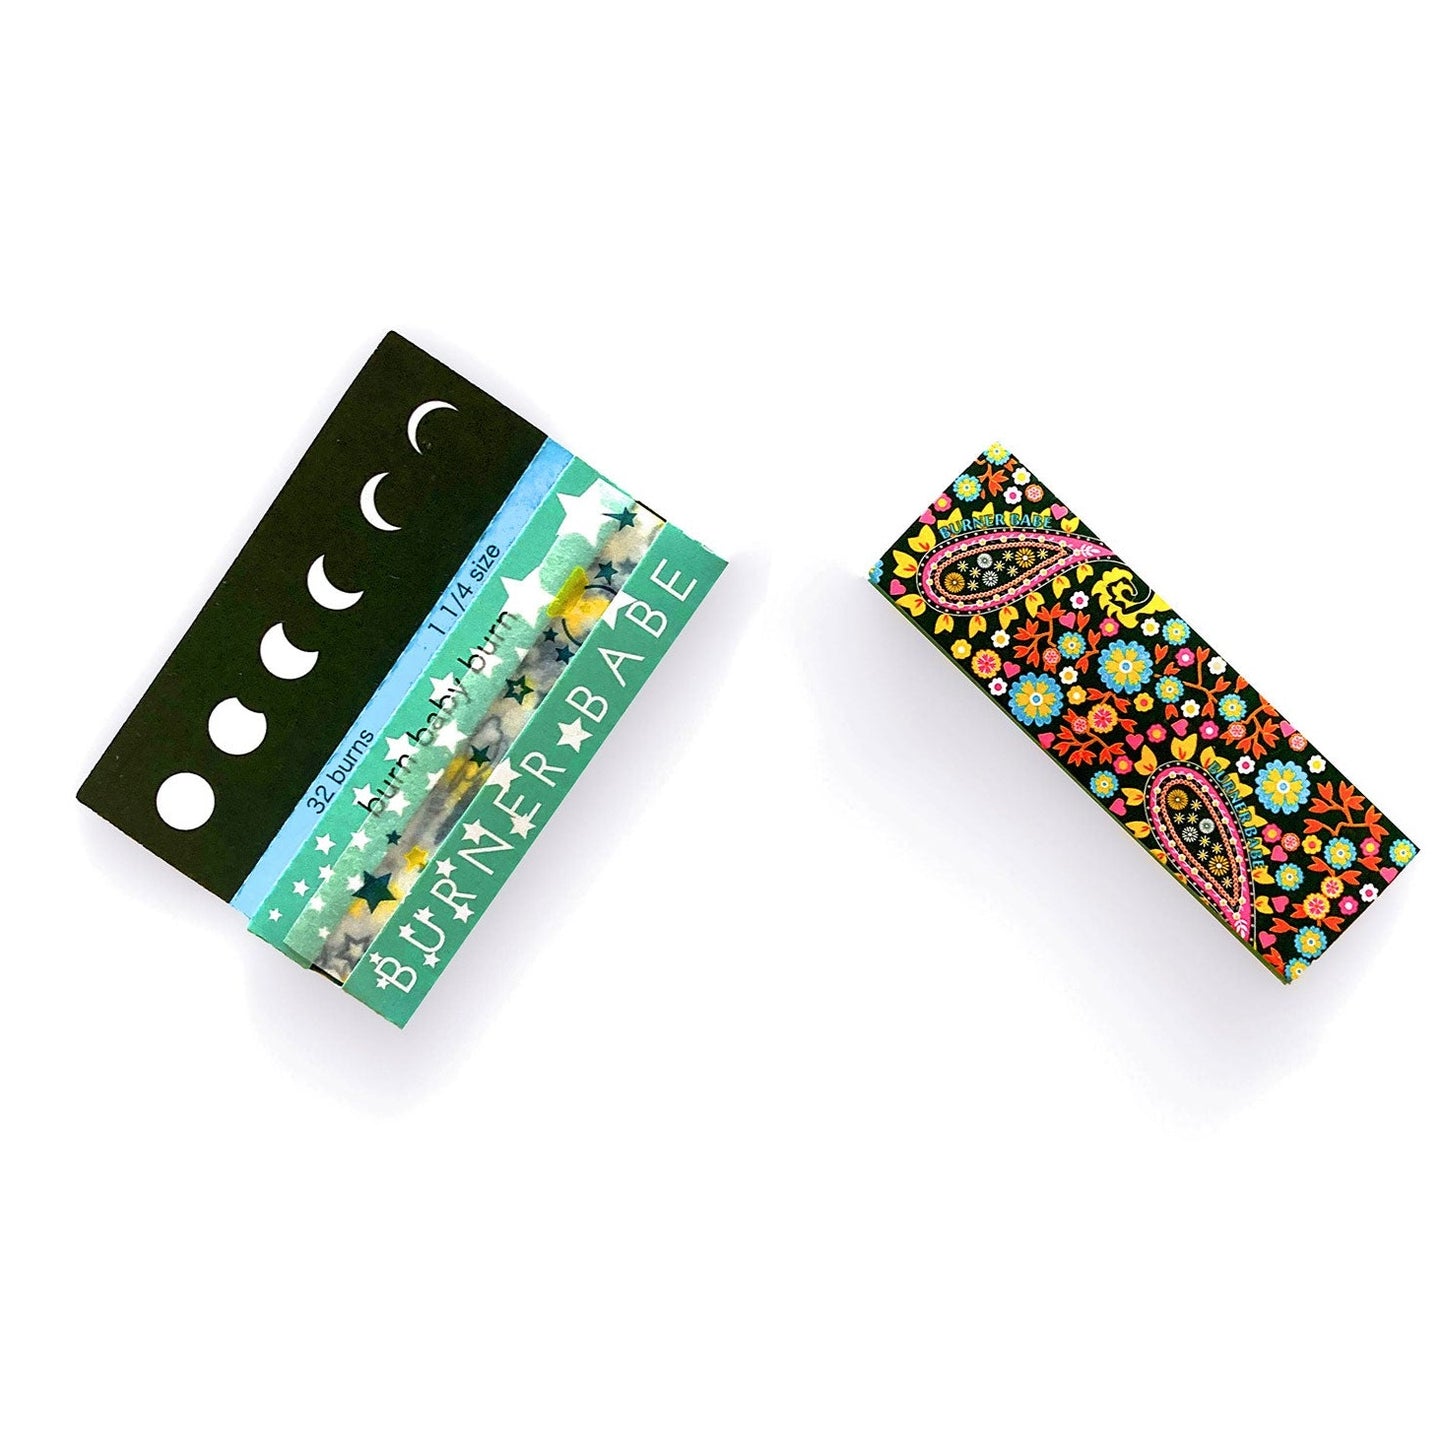 The Starlit Papers, set of 10: star, moon, galaxy patterned rolling papers. These designer rolling papers are girly, pretty, vegan, cute, cool, standard size, high quality, even burn, natural dyes, best tasting, slow burn.